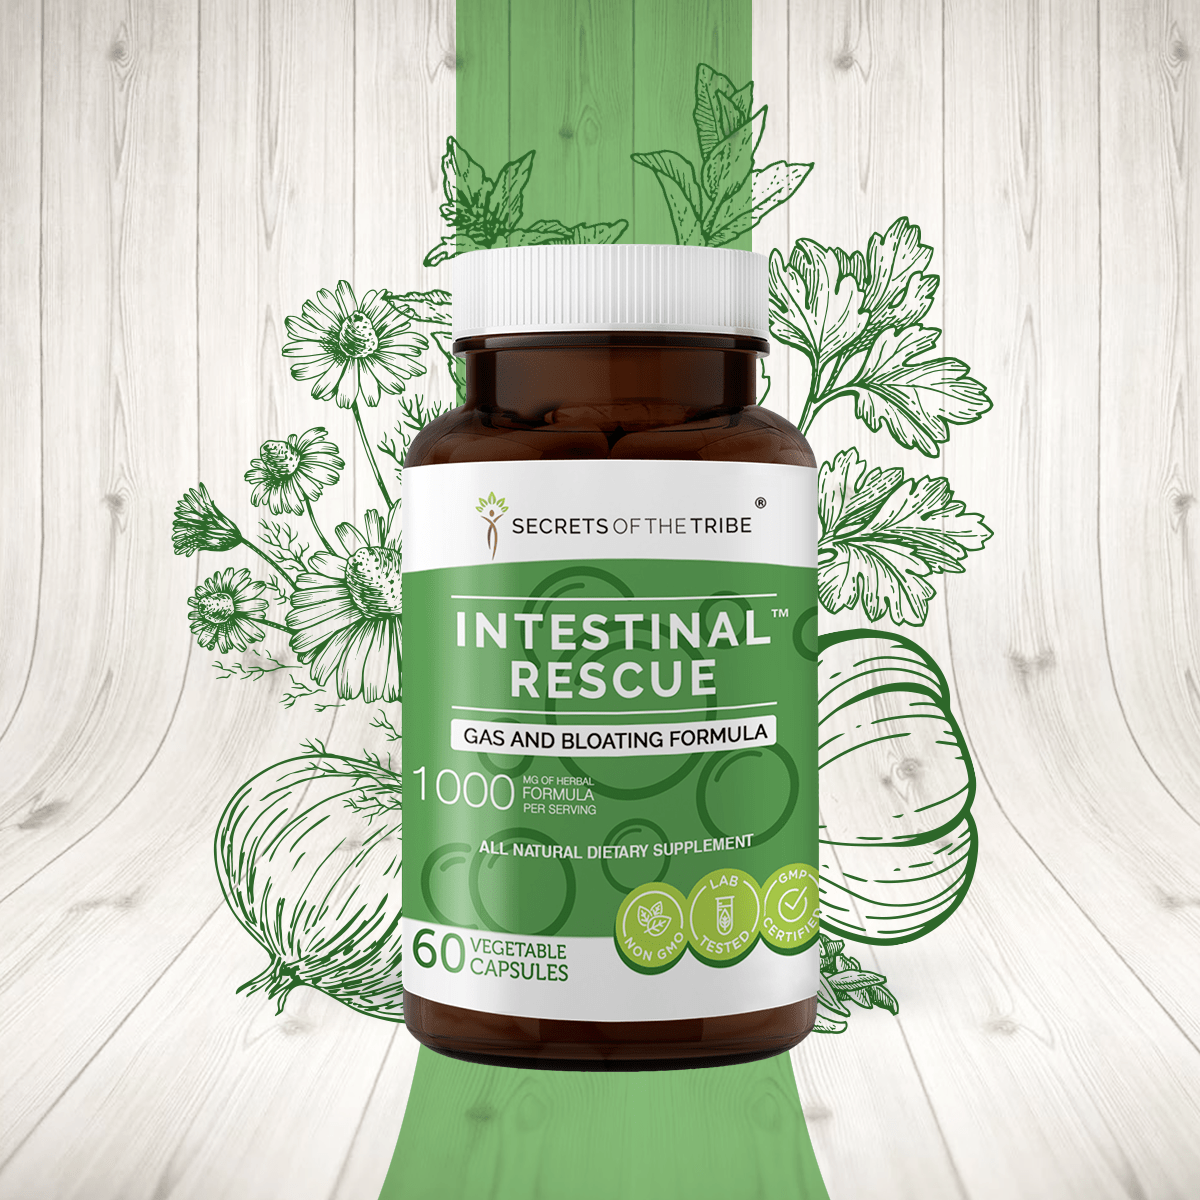 Intestinal Rescue Capsules. Gas and Bloating Formula